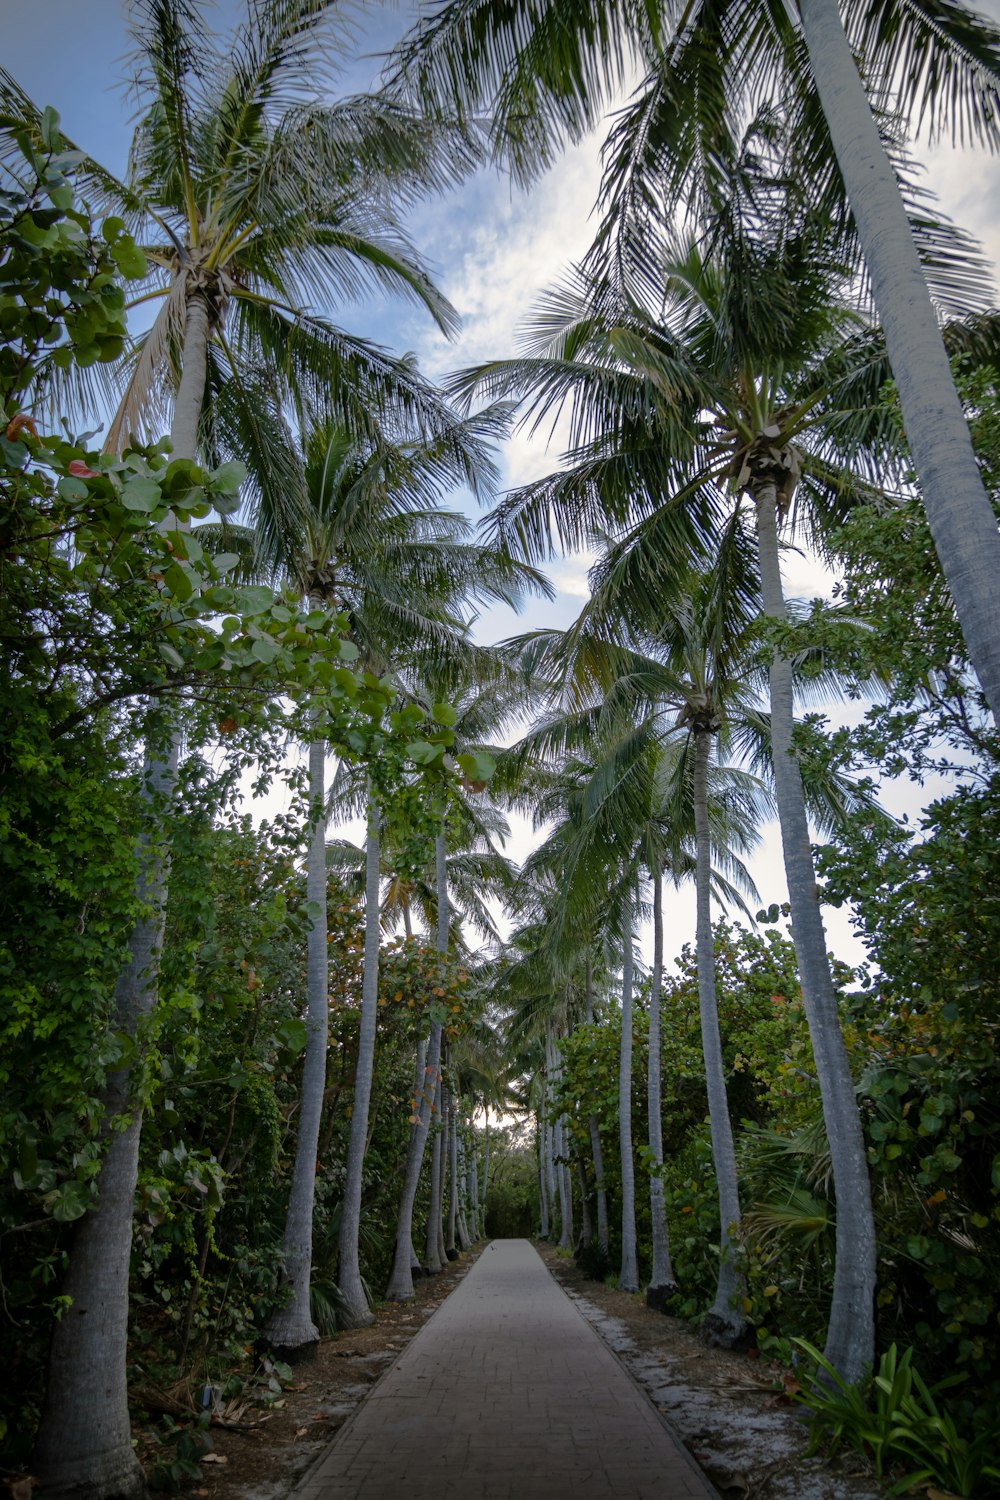 a pathway lined with palm trees on a cloudy day